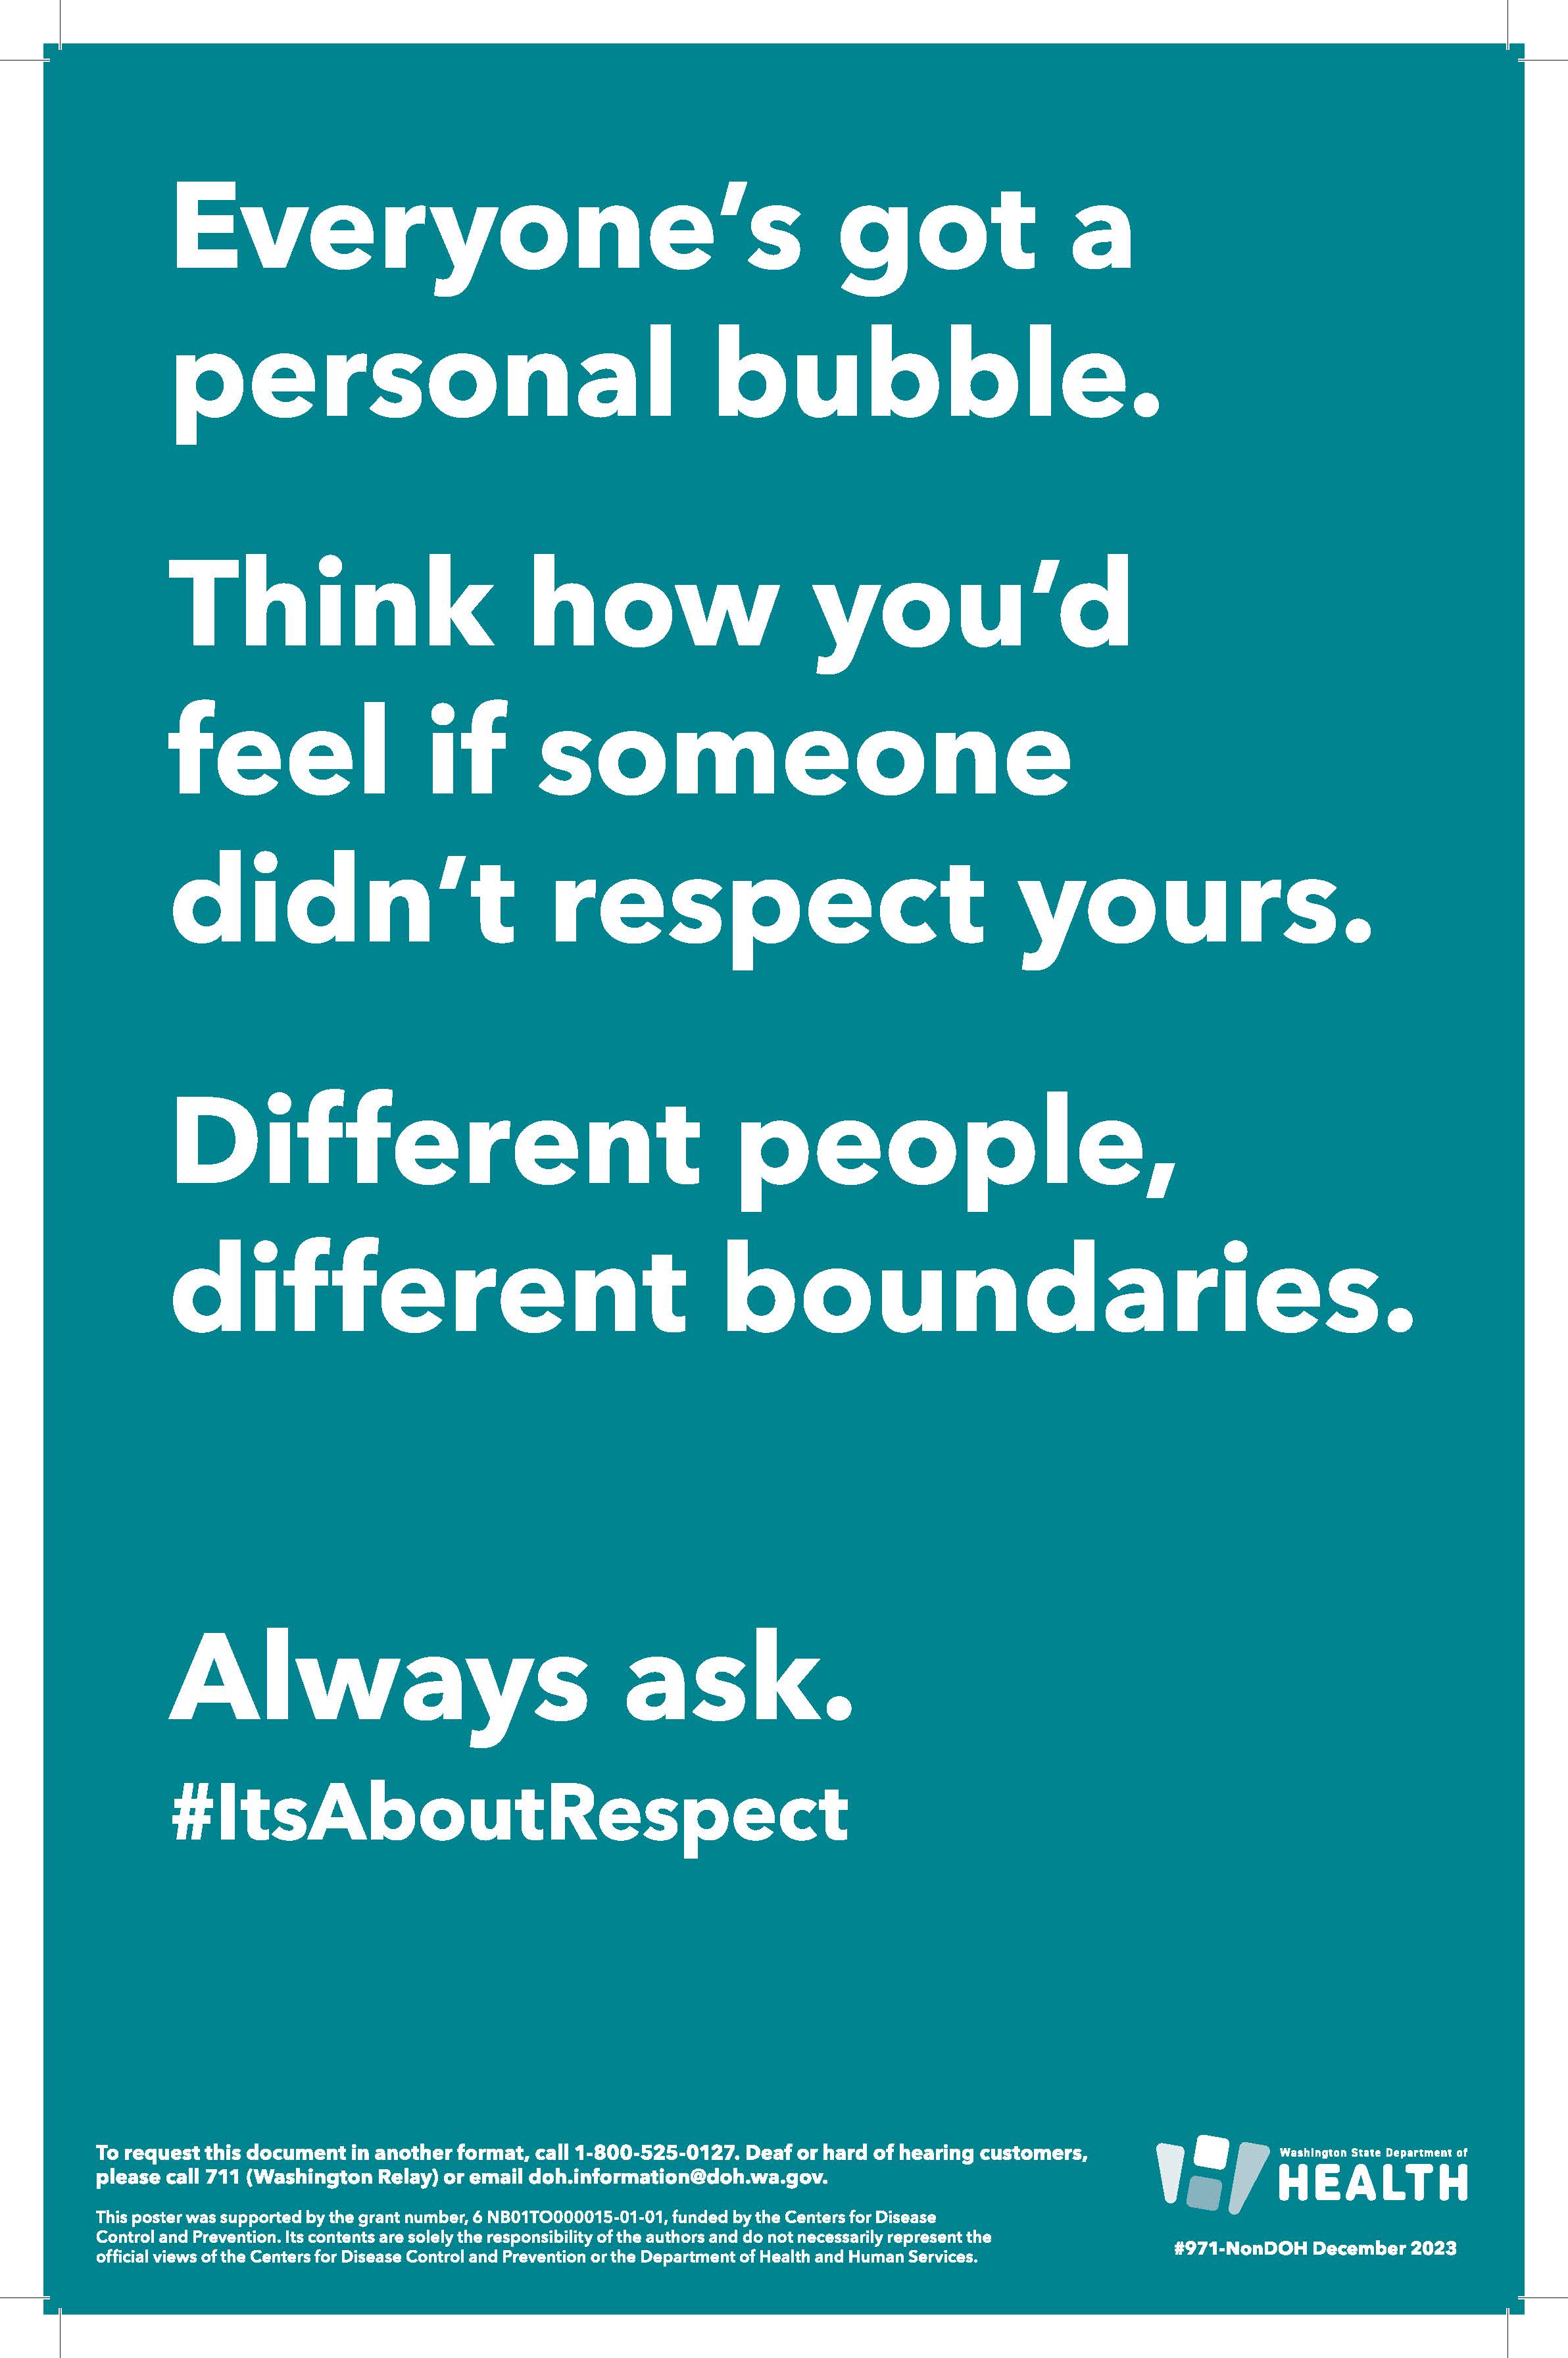 This poster image says “Everyone's got a personal bubble. Think how you'd feel if someone didn't respect yours. Different people, different boundaries. Always ask.” It features a cat in a plumed hat and the hashtag “it's about respect”.